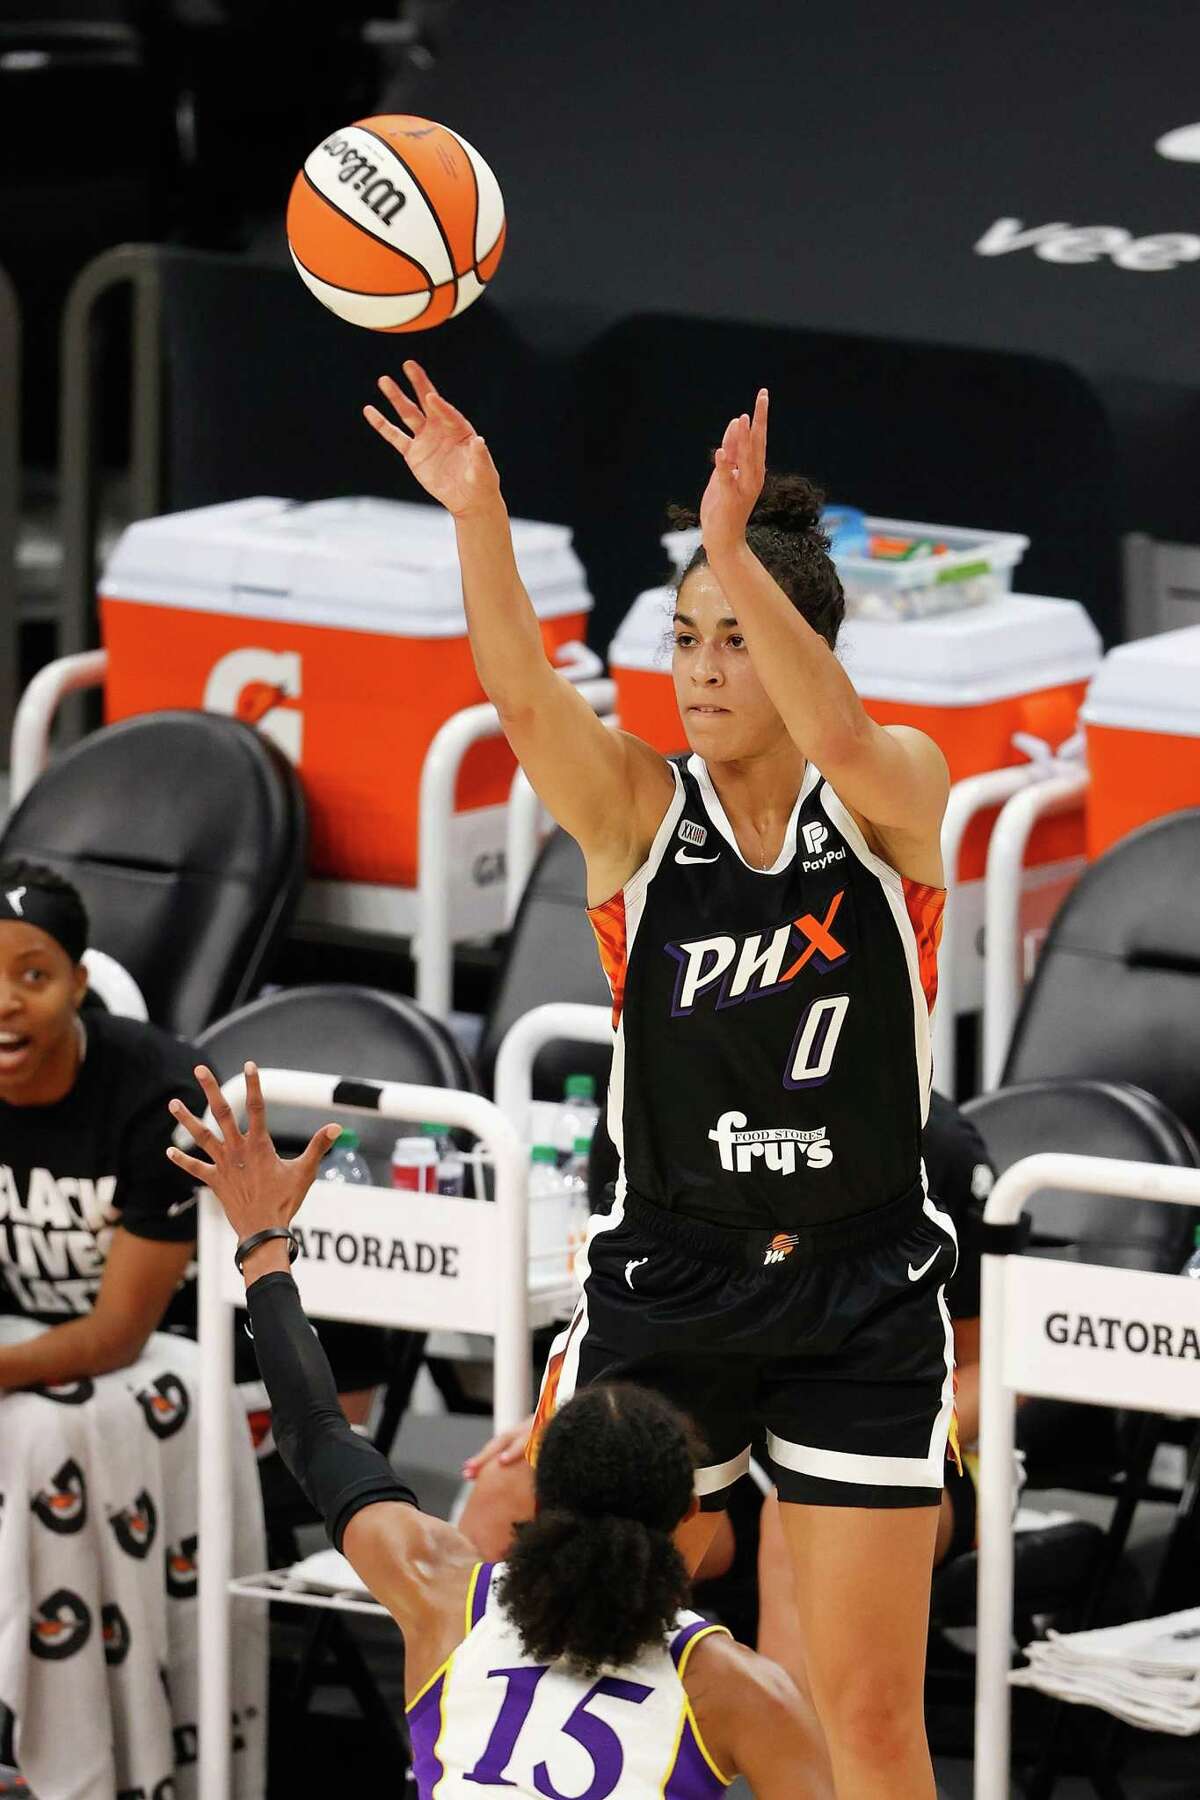 PHOENIX, ARIZONA - JUNE 27: Kia Nurse #0 of the Phoenix Mercury attempts a three-point shot against the Los Angeles Sparks during the first half of the WNBA game at Phoenix Suns Arena on June 27, 2021 in Phoenix, Arizona. NOTE TO USER: User expressly acknowledges and agrees that, by downloading and or using this photograph, User is consenting to the terms and conditions of the Getty Images License Agreement. (Photo by Christian Petersen/Getty Images)